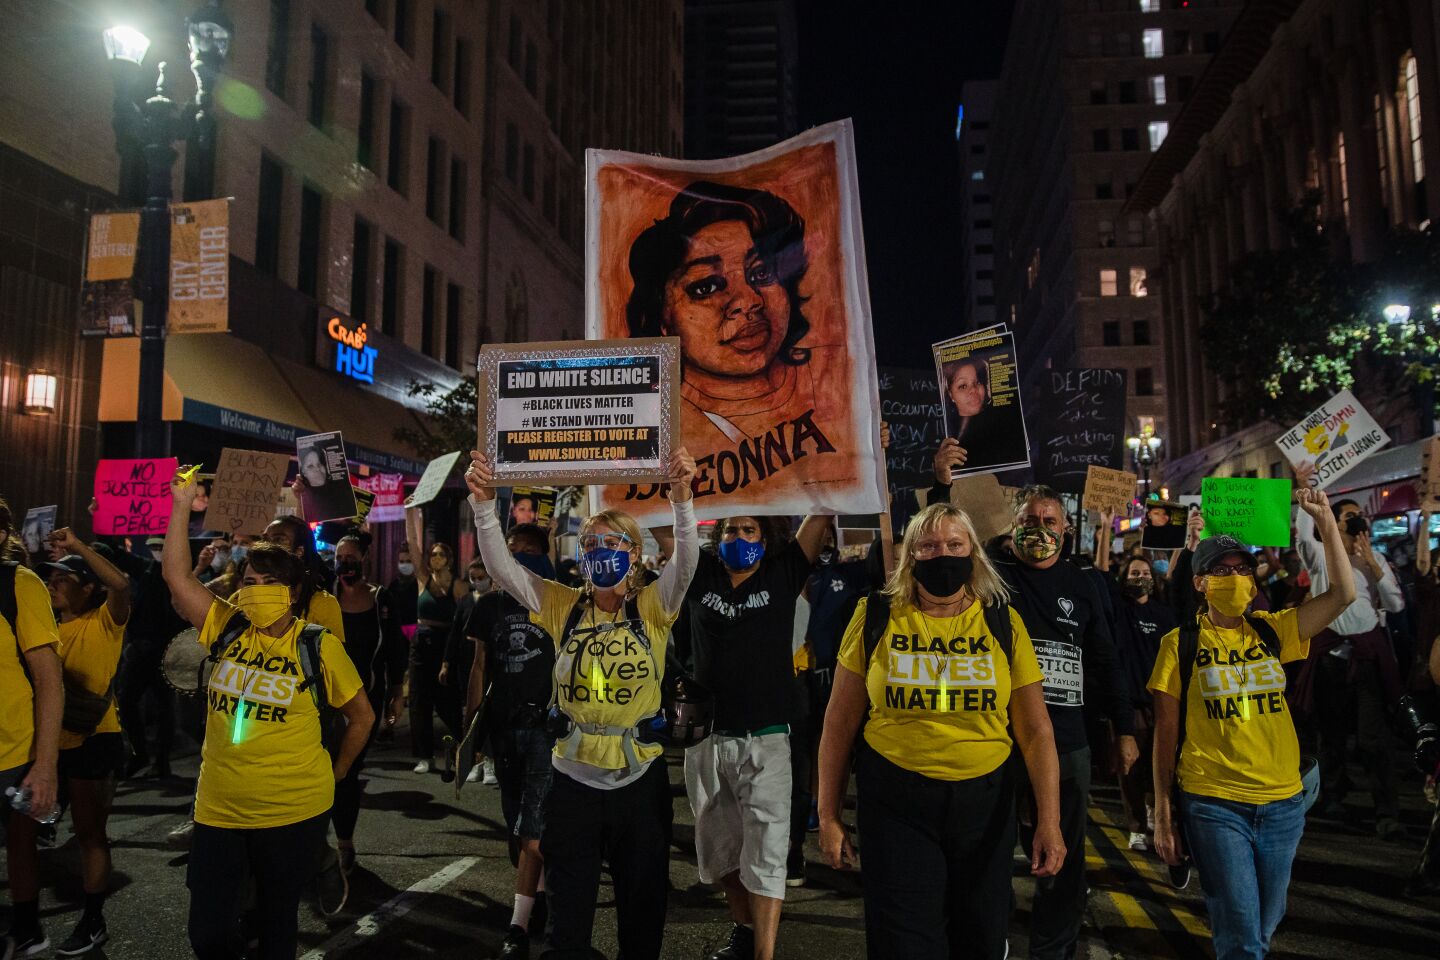 Protesters march through the streets of downtown San Diego on September 23, 2020 after a grand jury in Kentucky declined to bring homicide charges against officers in the death of Breonna Taylor.